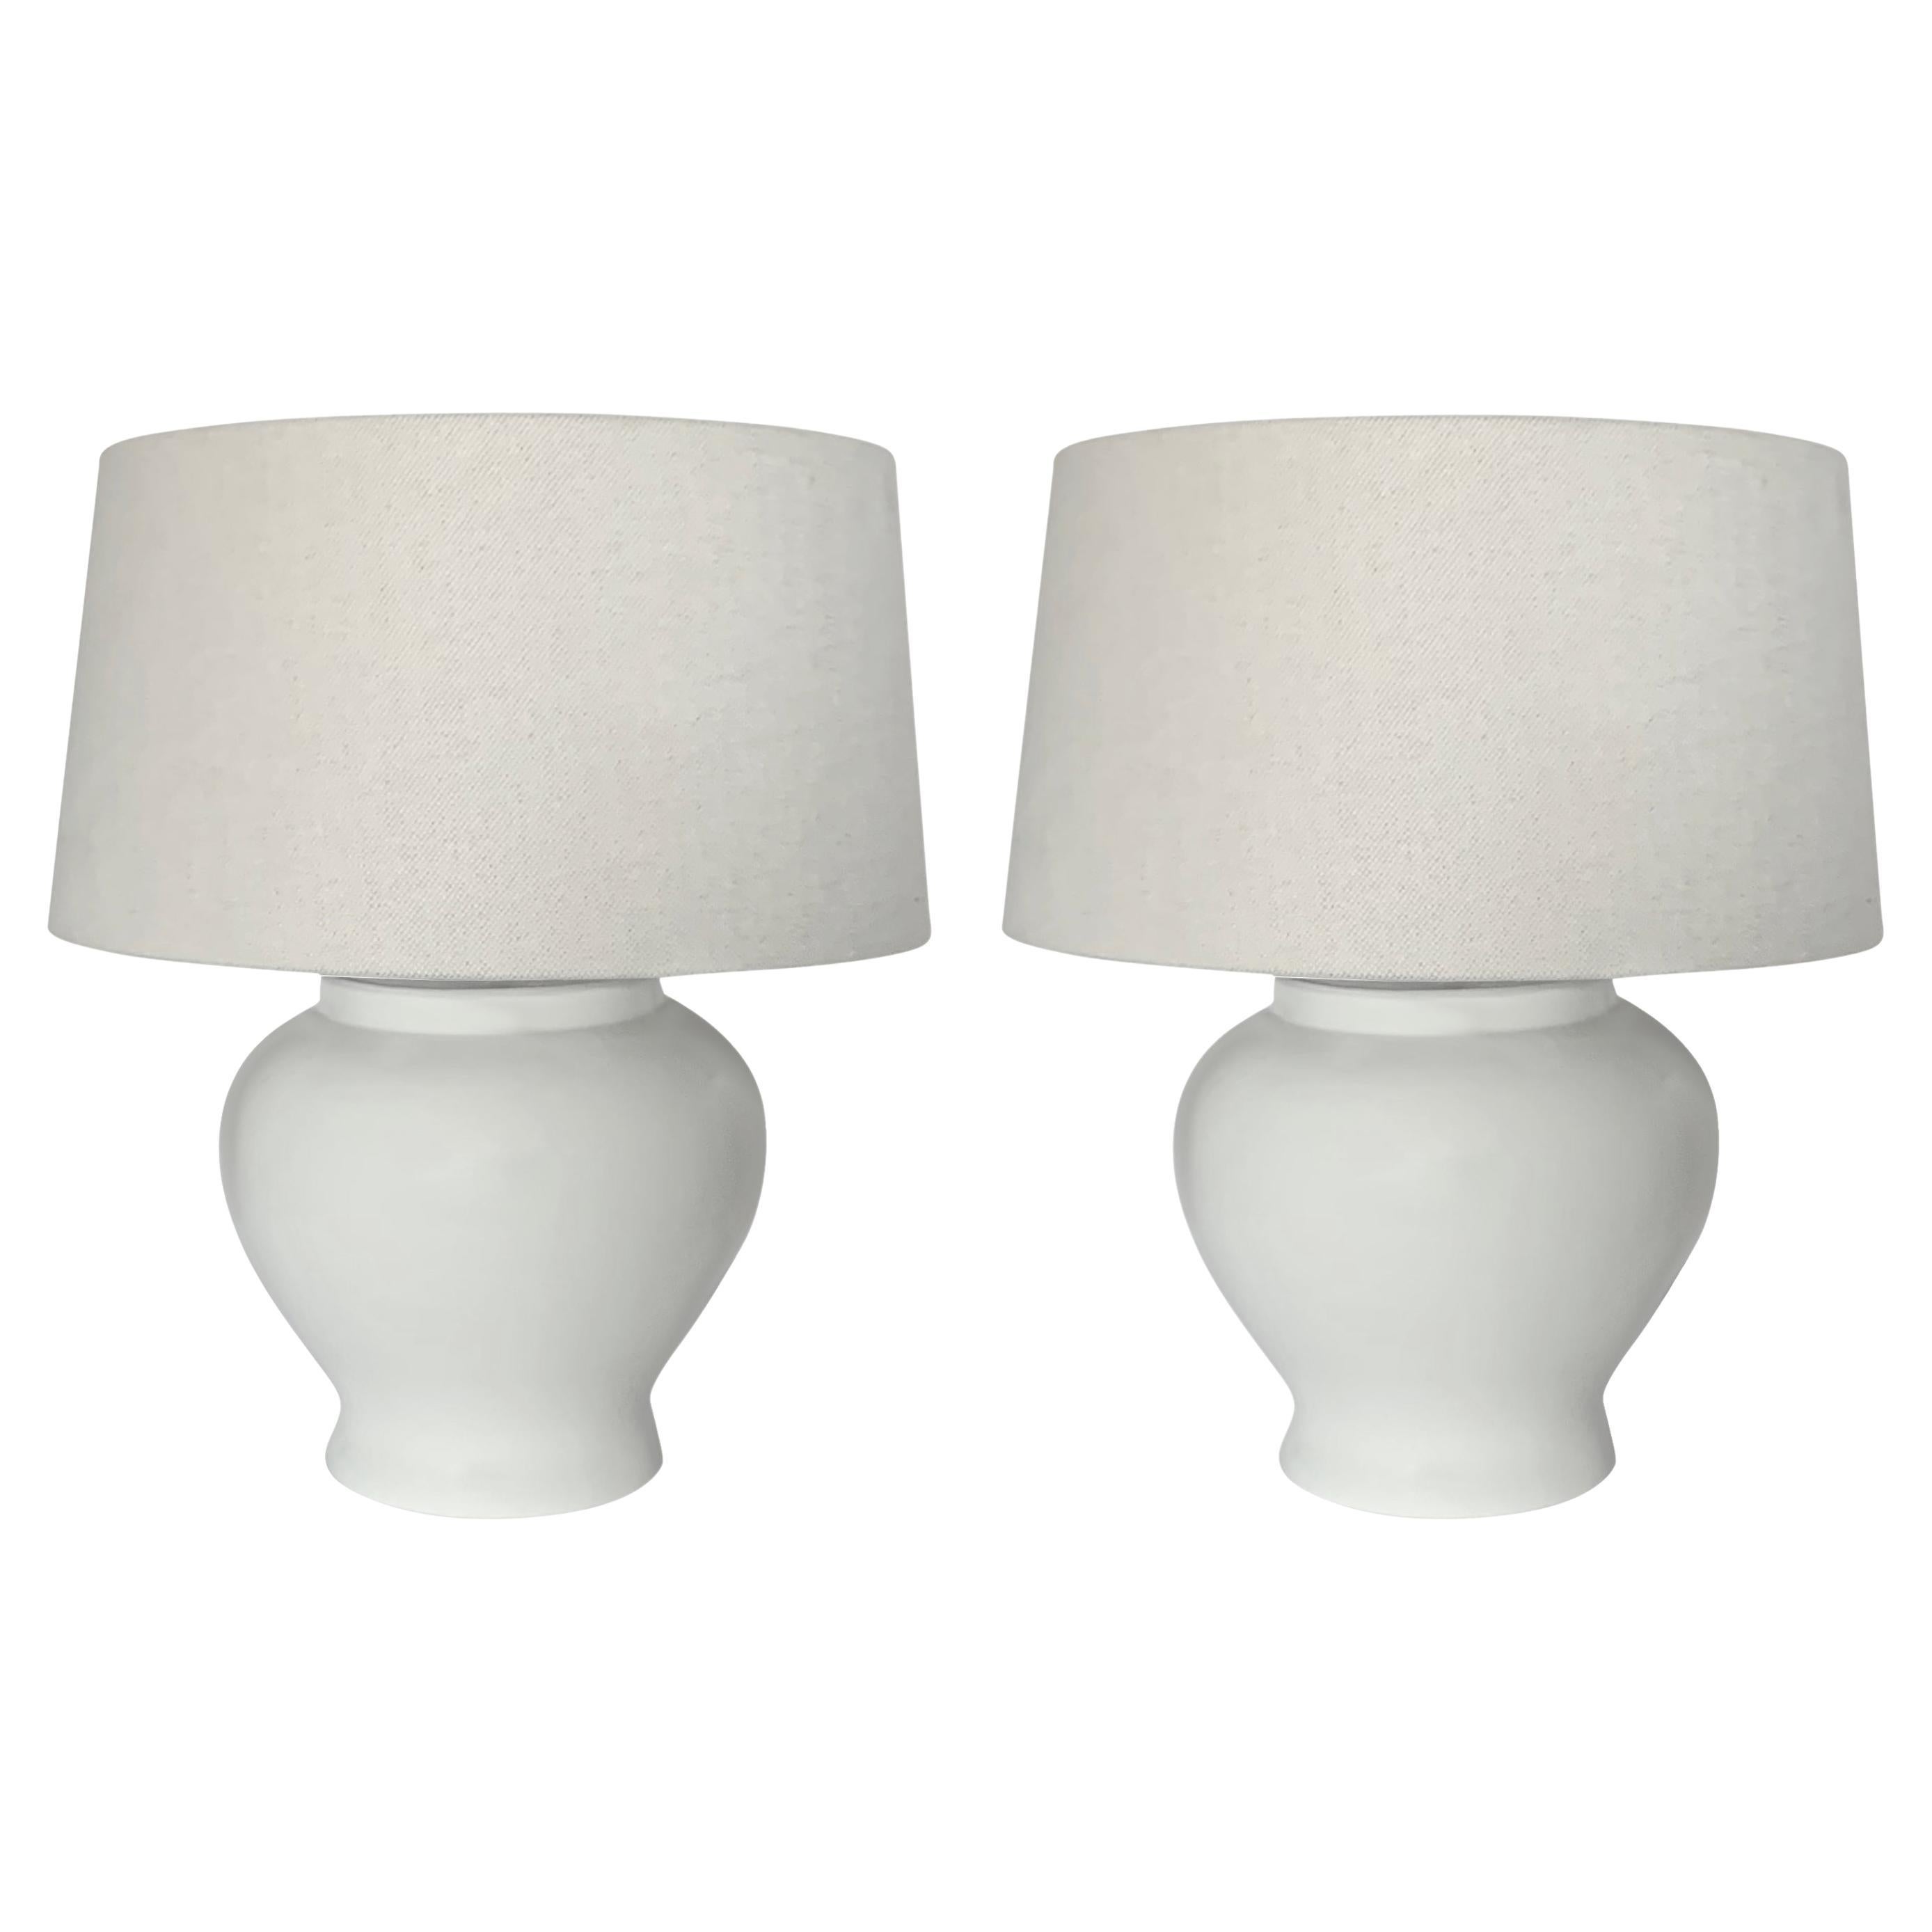 White Small Ginger Jar Shape Lamps, China, Contemporary